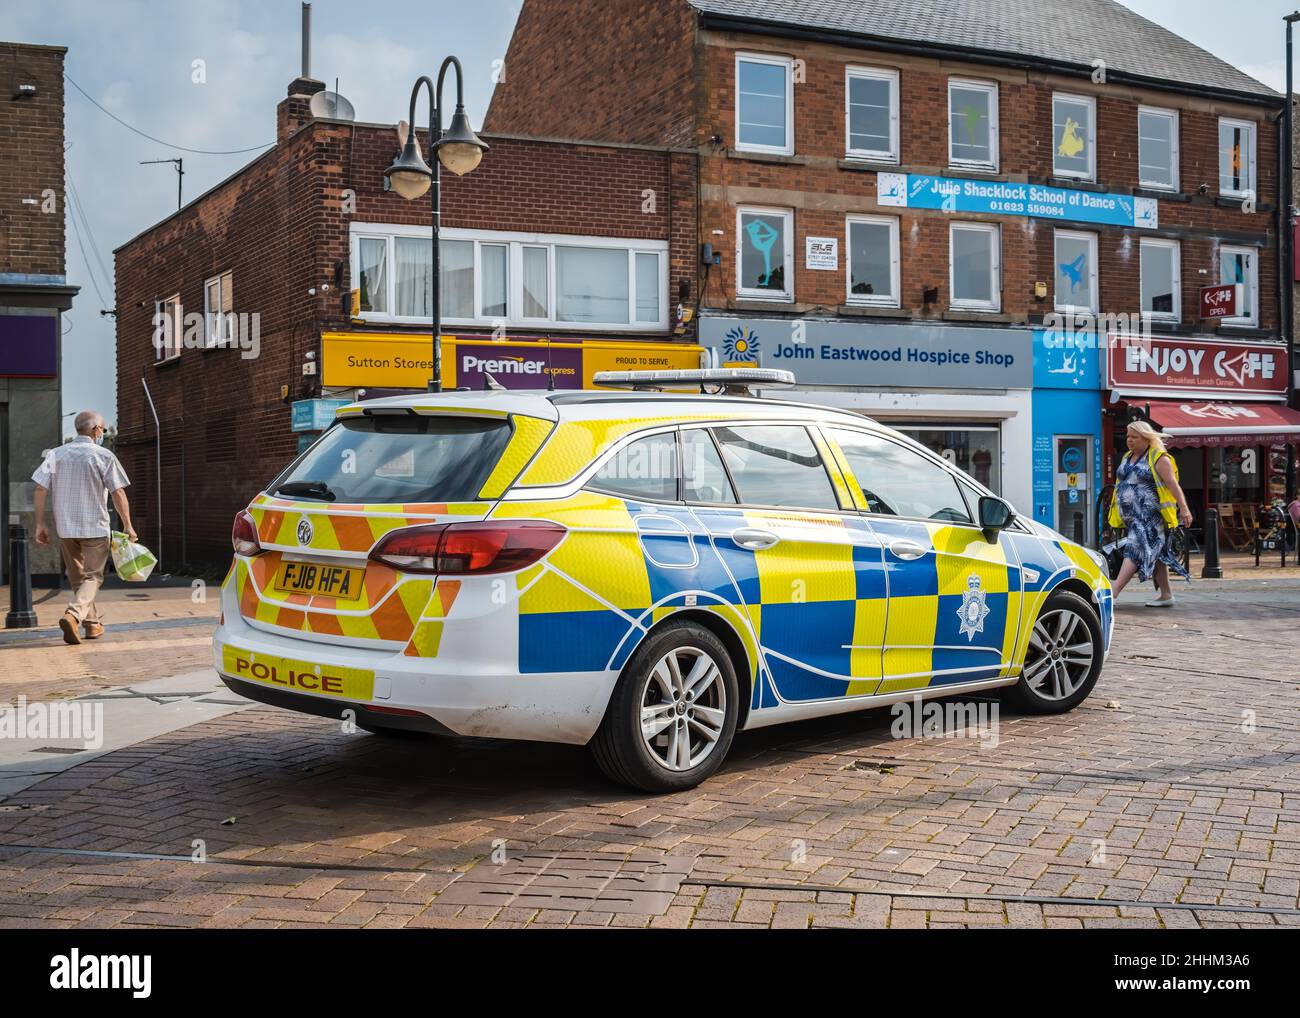 Mansfield, Nottinghamshire 28.1.2022 - Police force armed officer response car parked at criminal investigation incident scene. Stock Photo